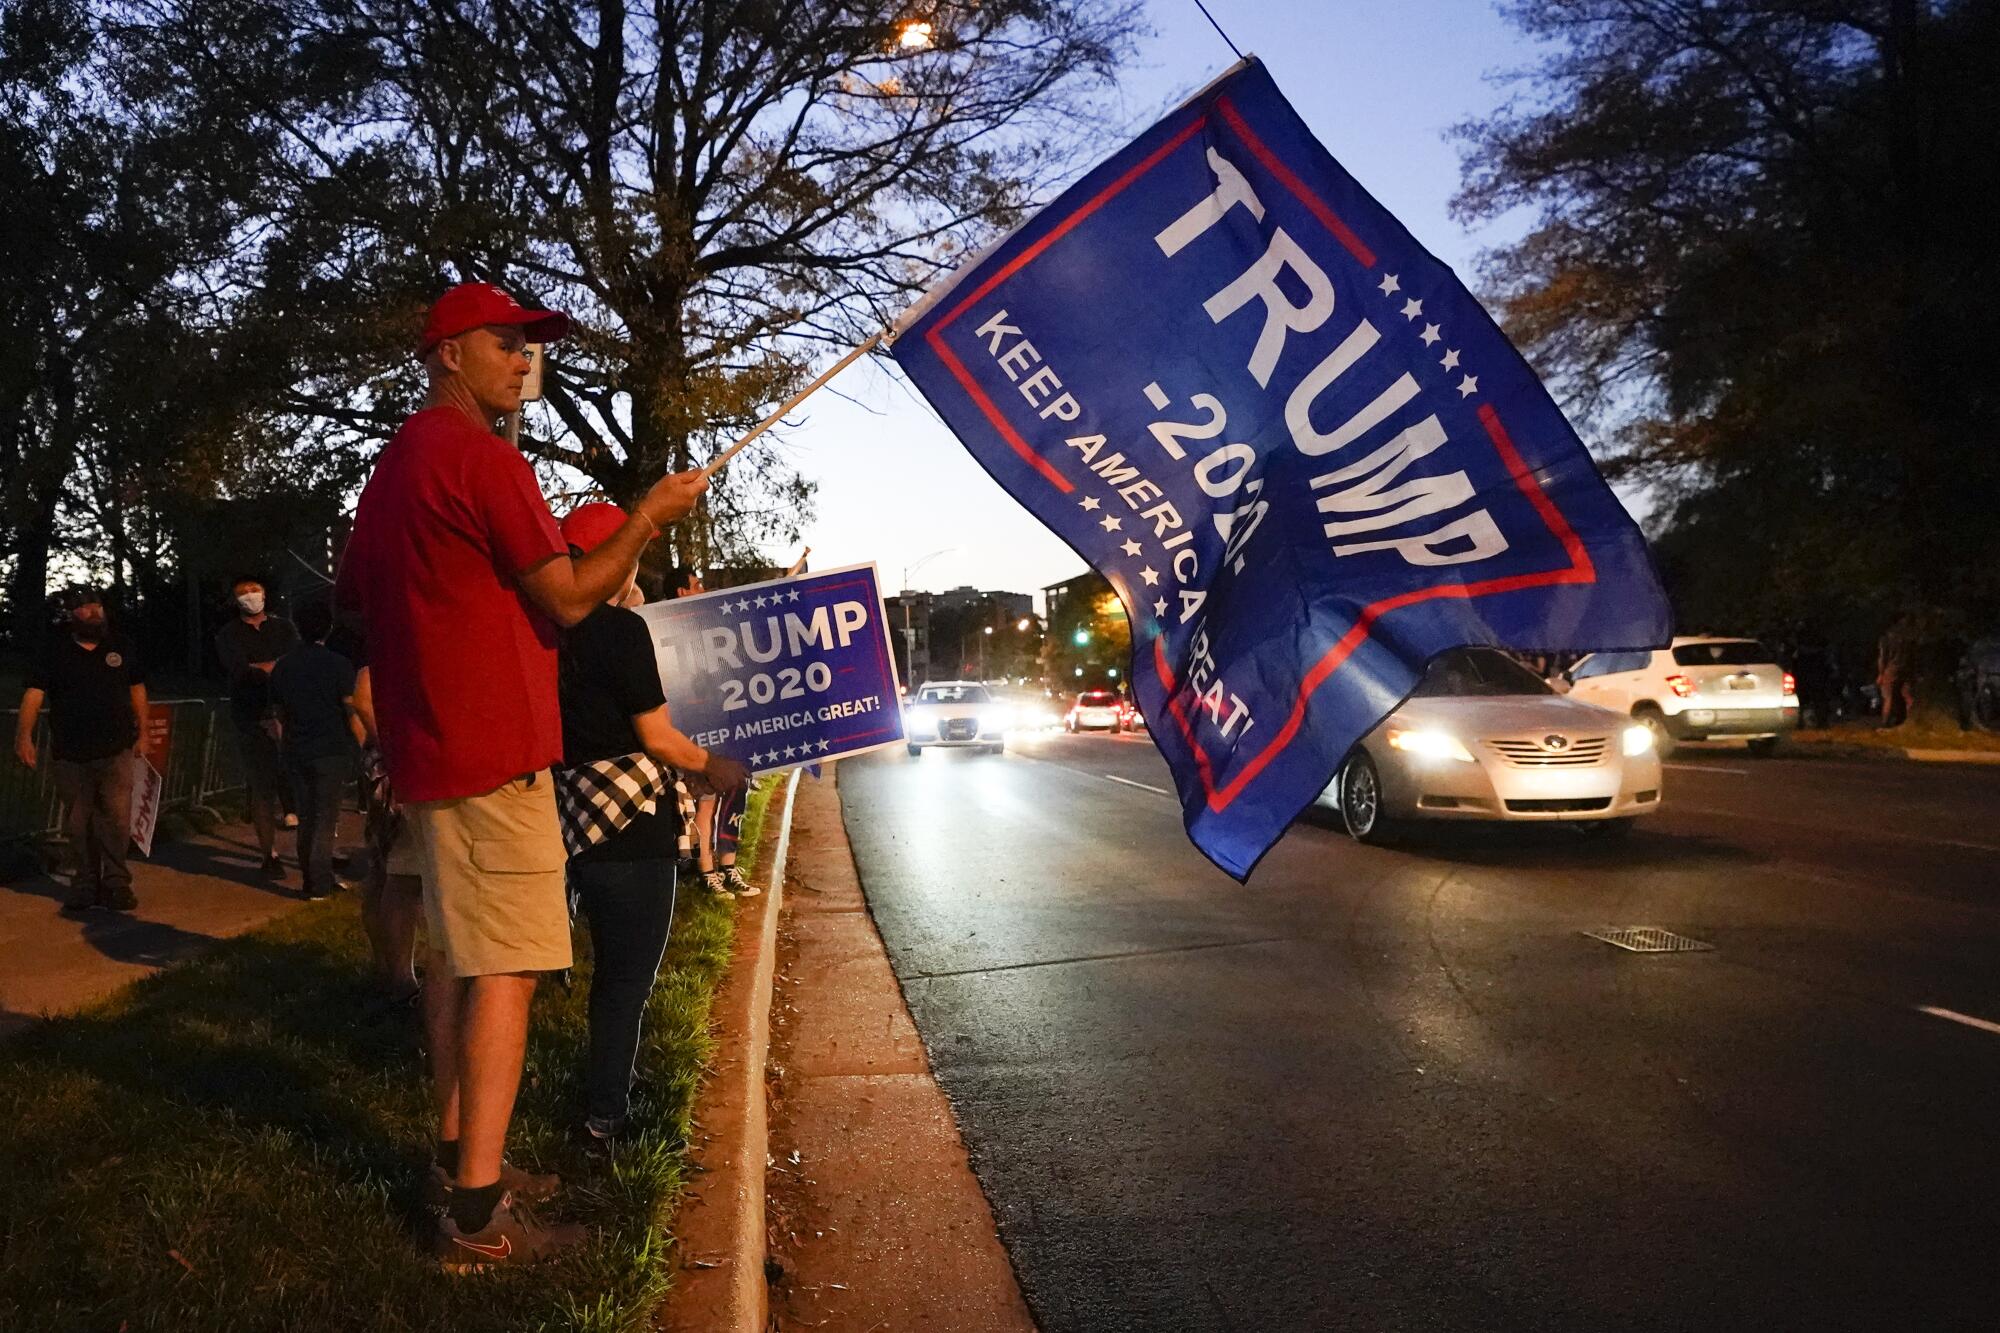 A man holds a Trump 2020 Keep America Great flag on the side of a road as cars drive by